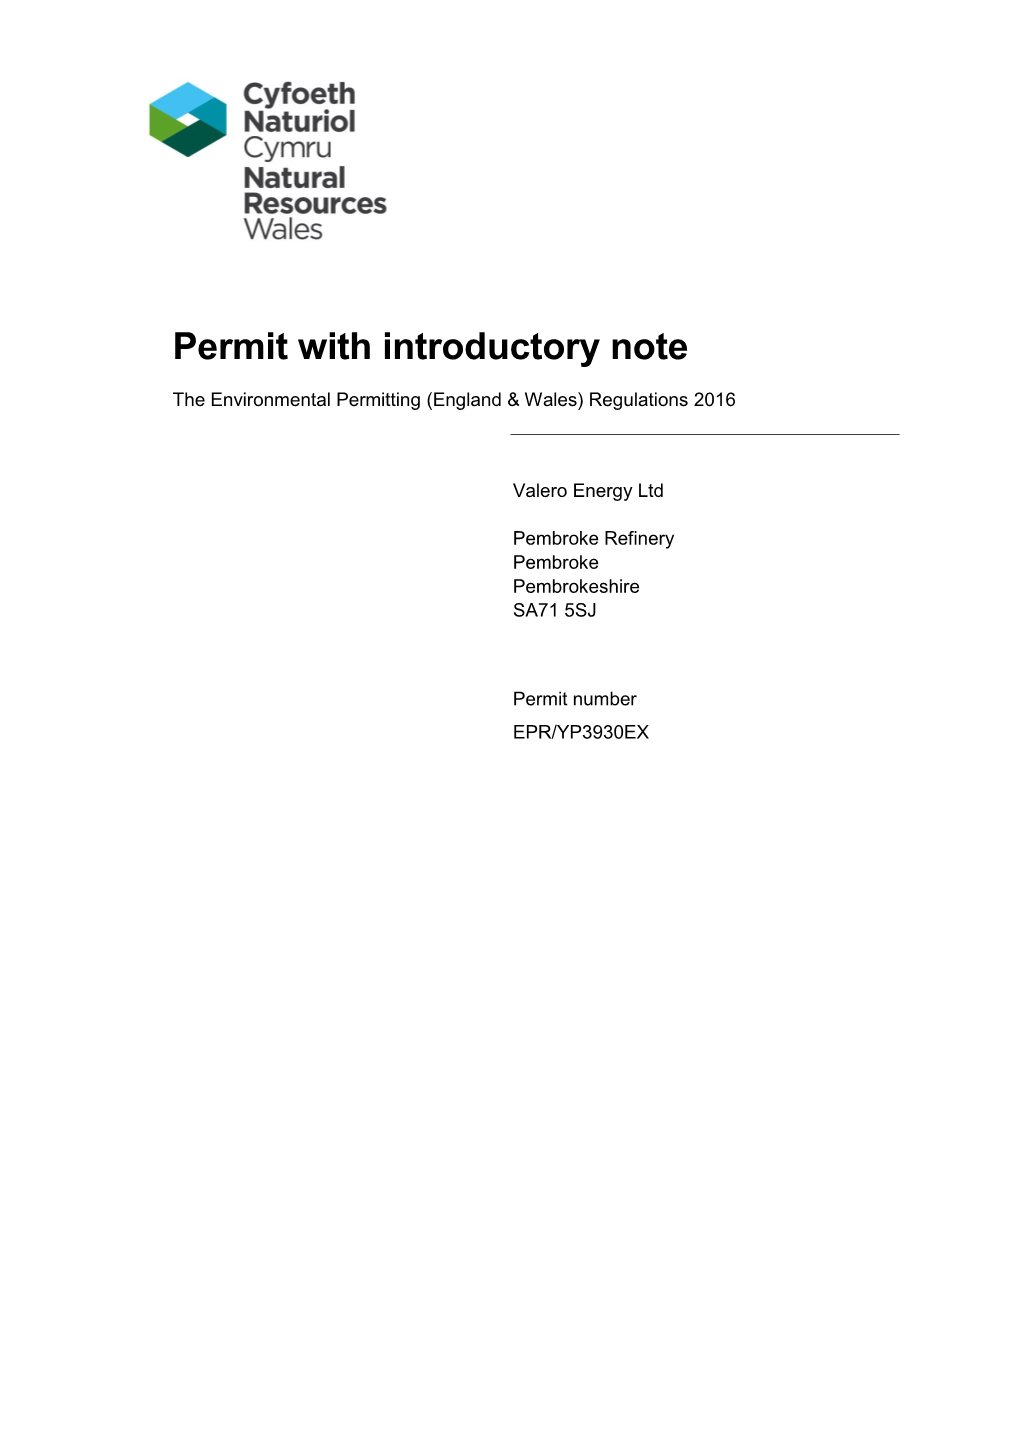 Pembroke Refinery Permit Number EPR/YP3930EX Introductory Note